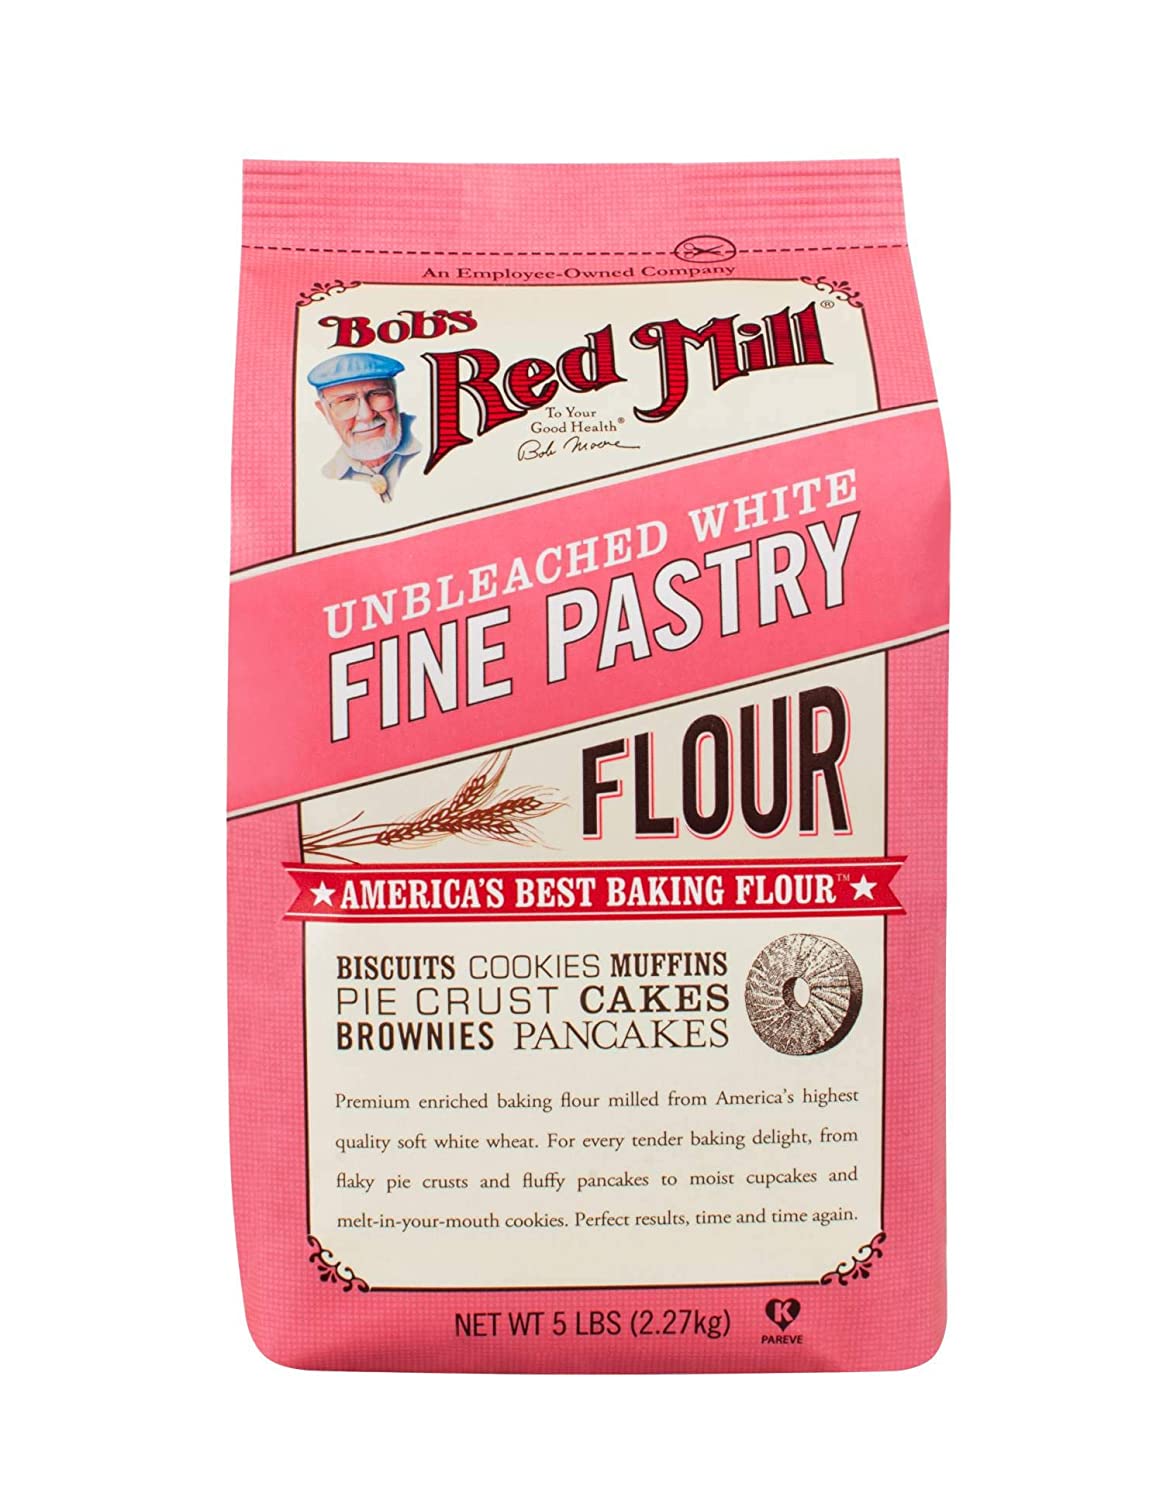 Pastry flour is one of the best substitutes for all-purpose flour